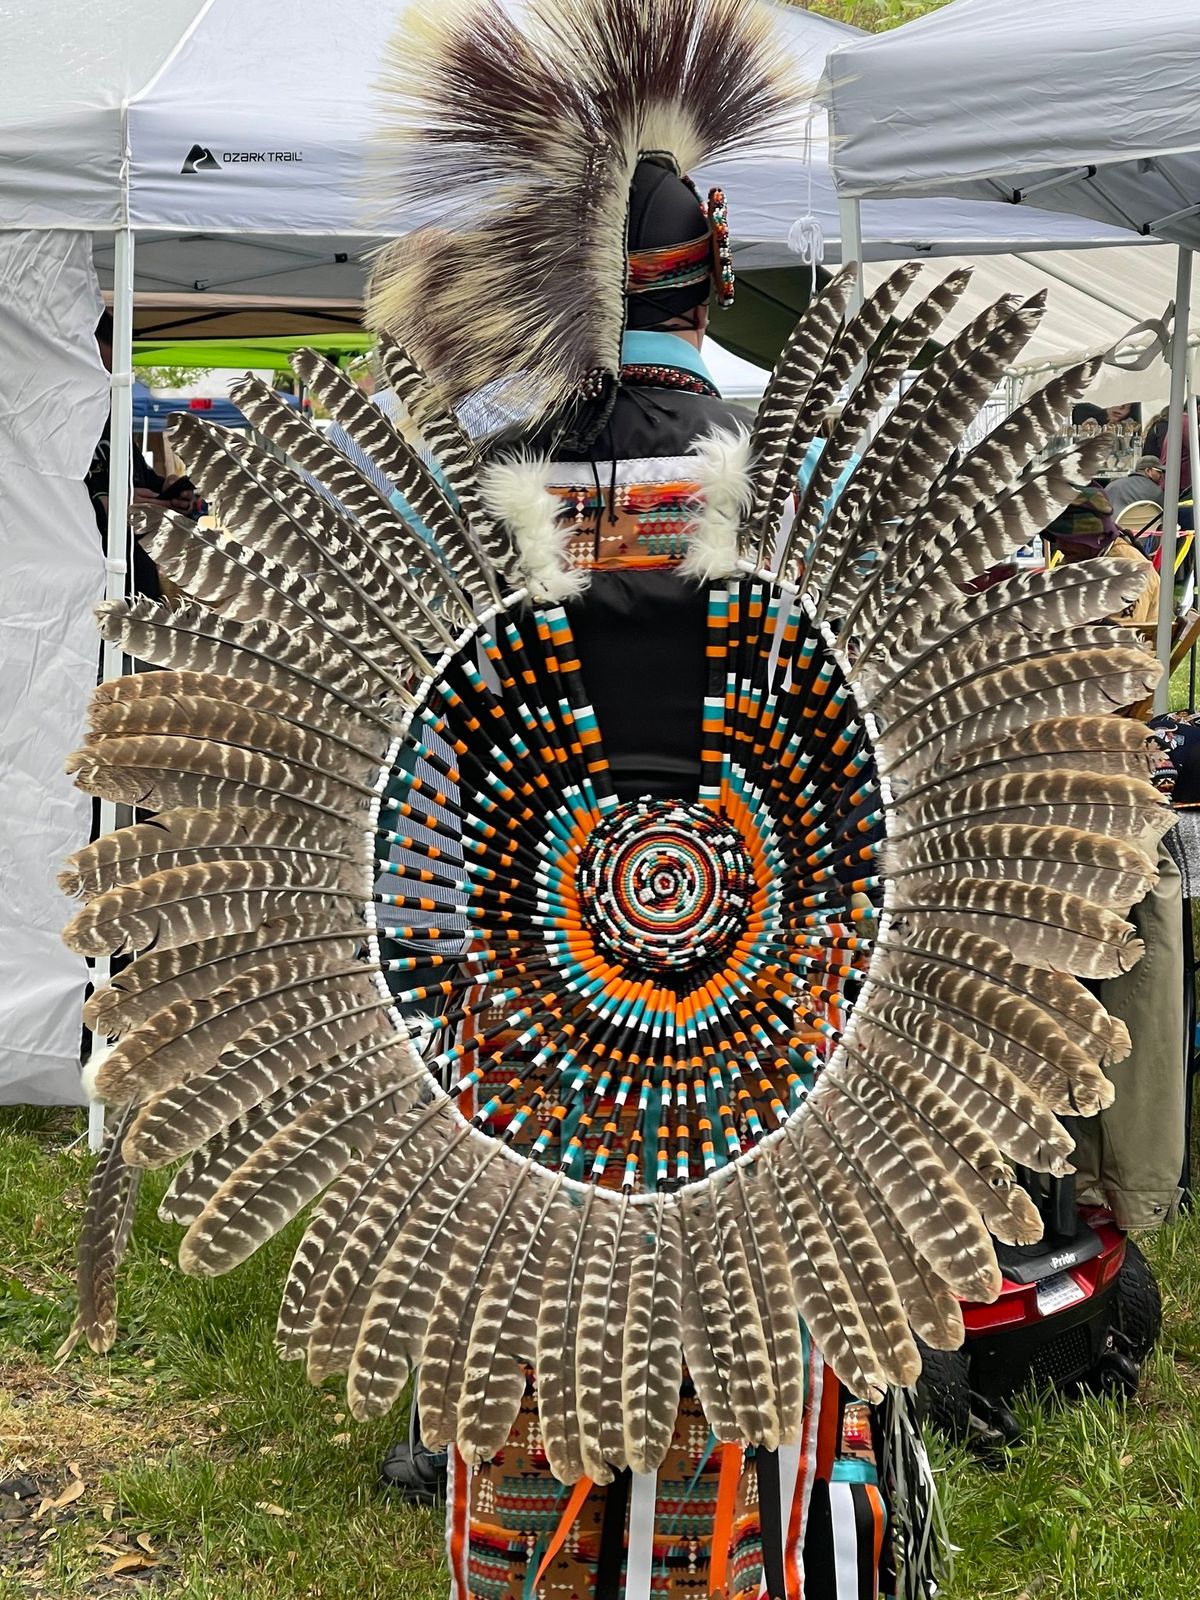 Return to Mauch Chunk Pow wow